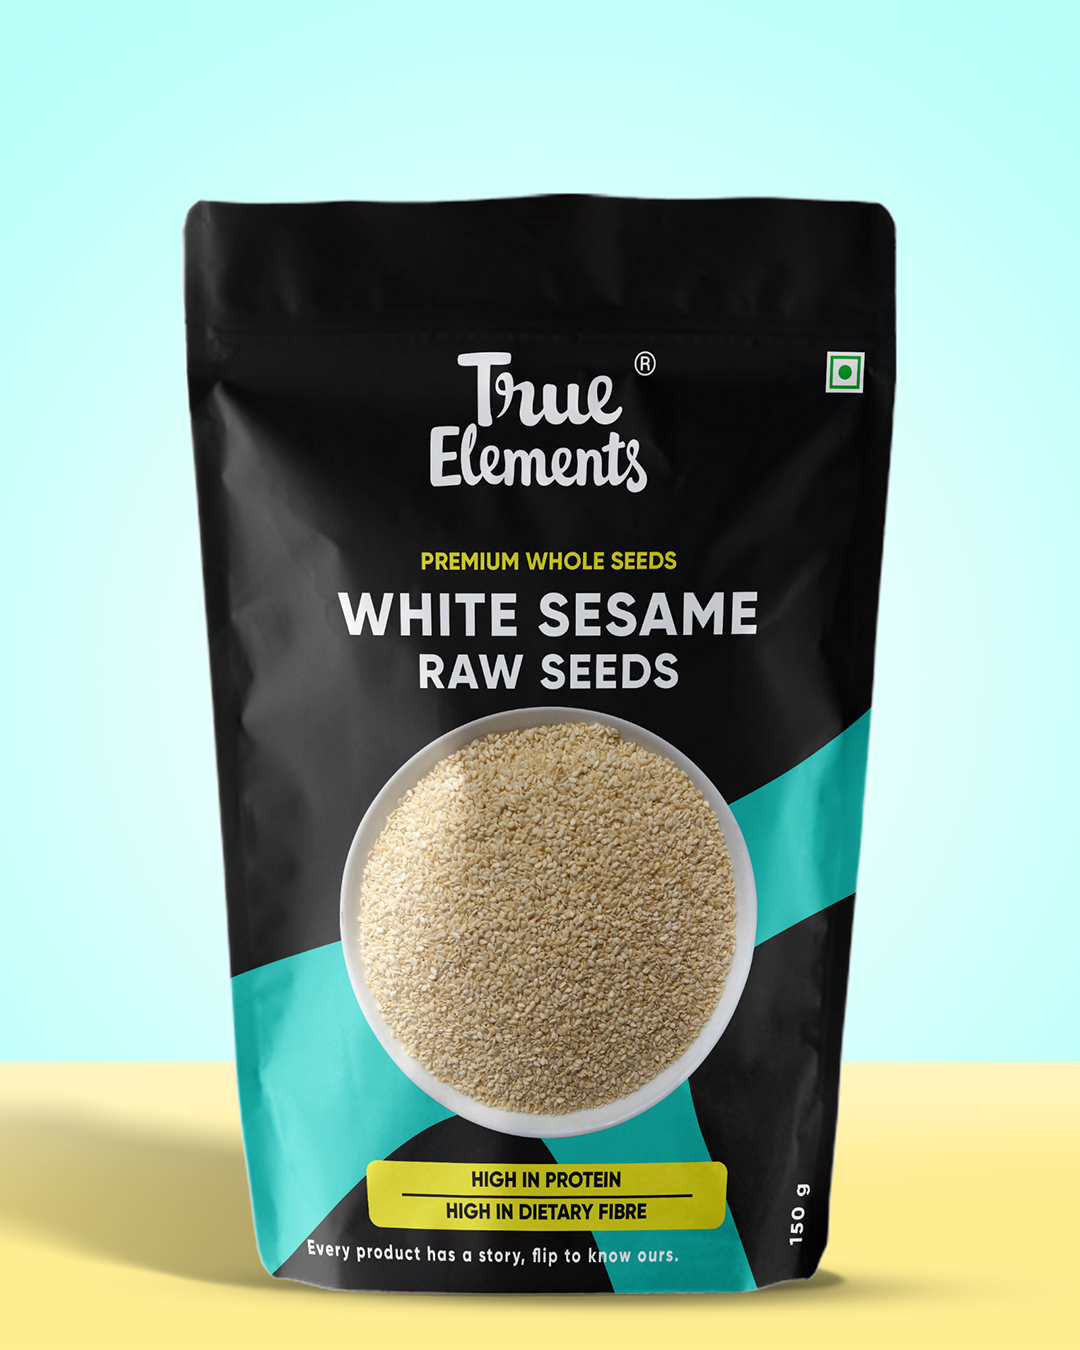 True elements raw white sesame seeds 150g Pouch (Premium Whole Seeds)